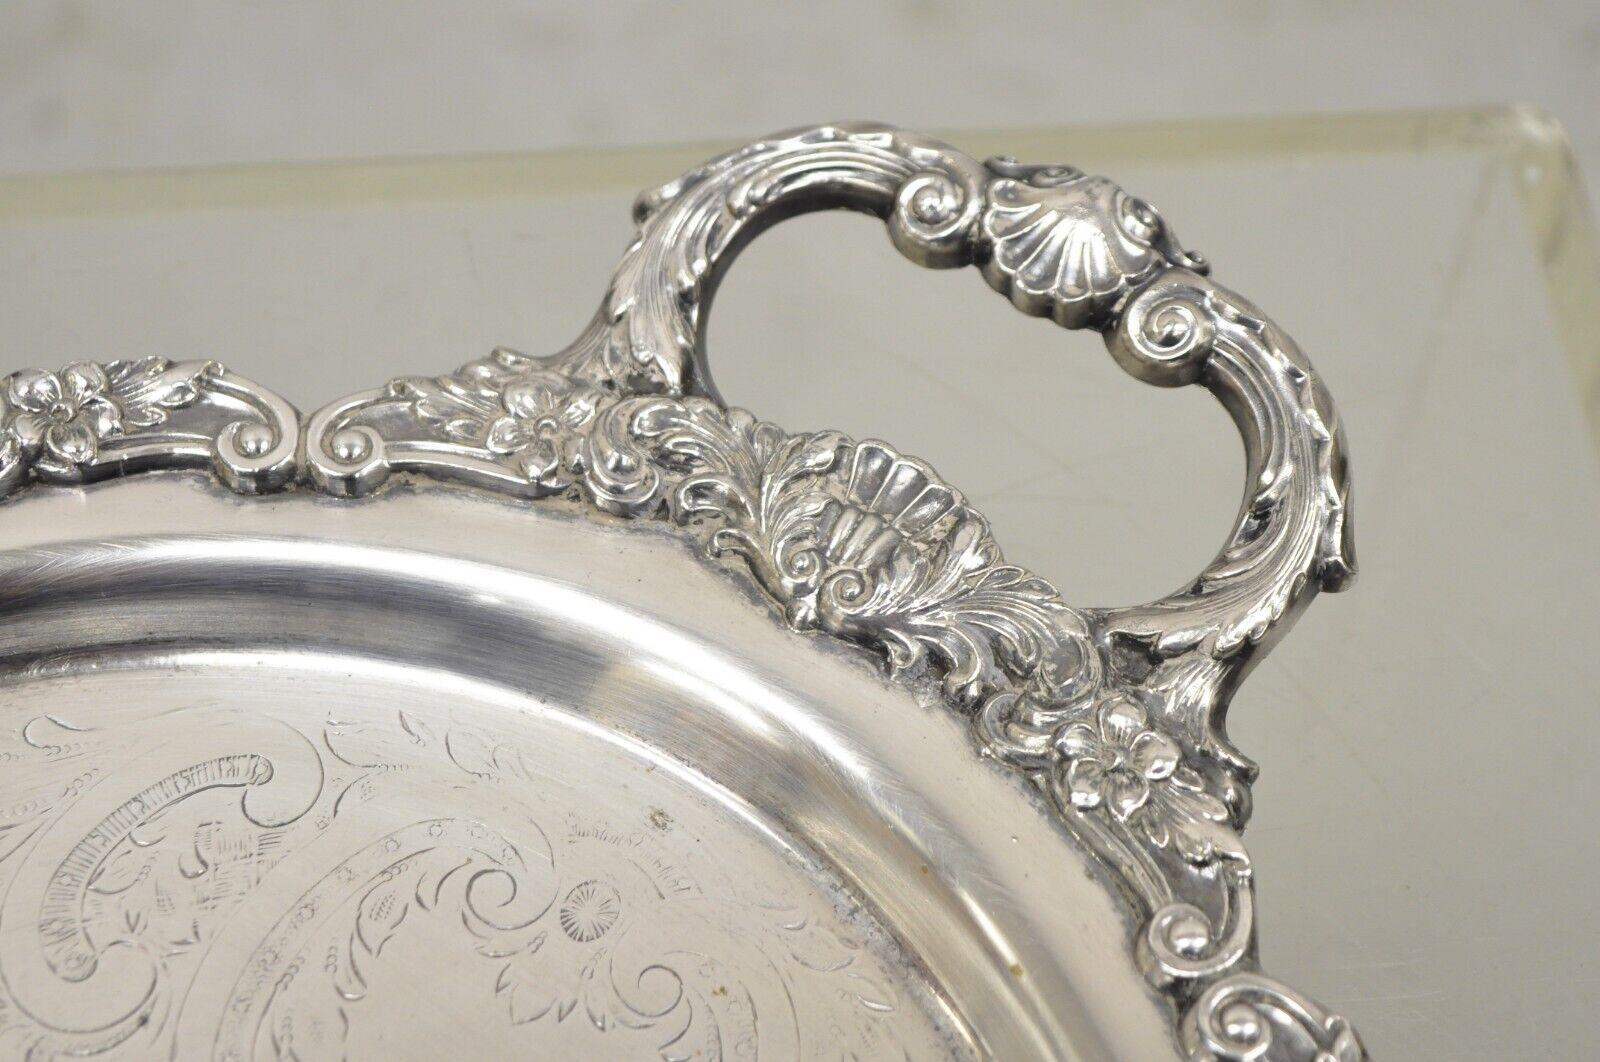 Vintage Epca Bristol Silverplate by Poole Silver Plated Oval Platter Tray 1